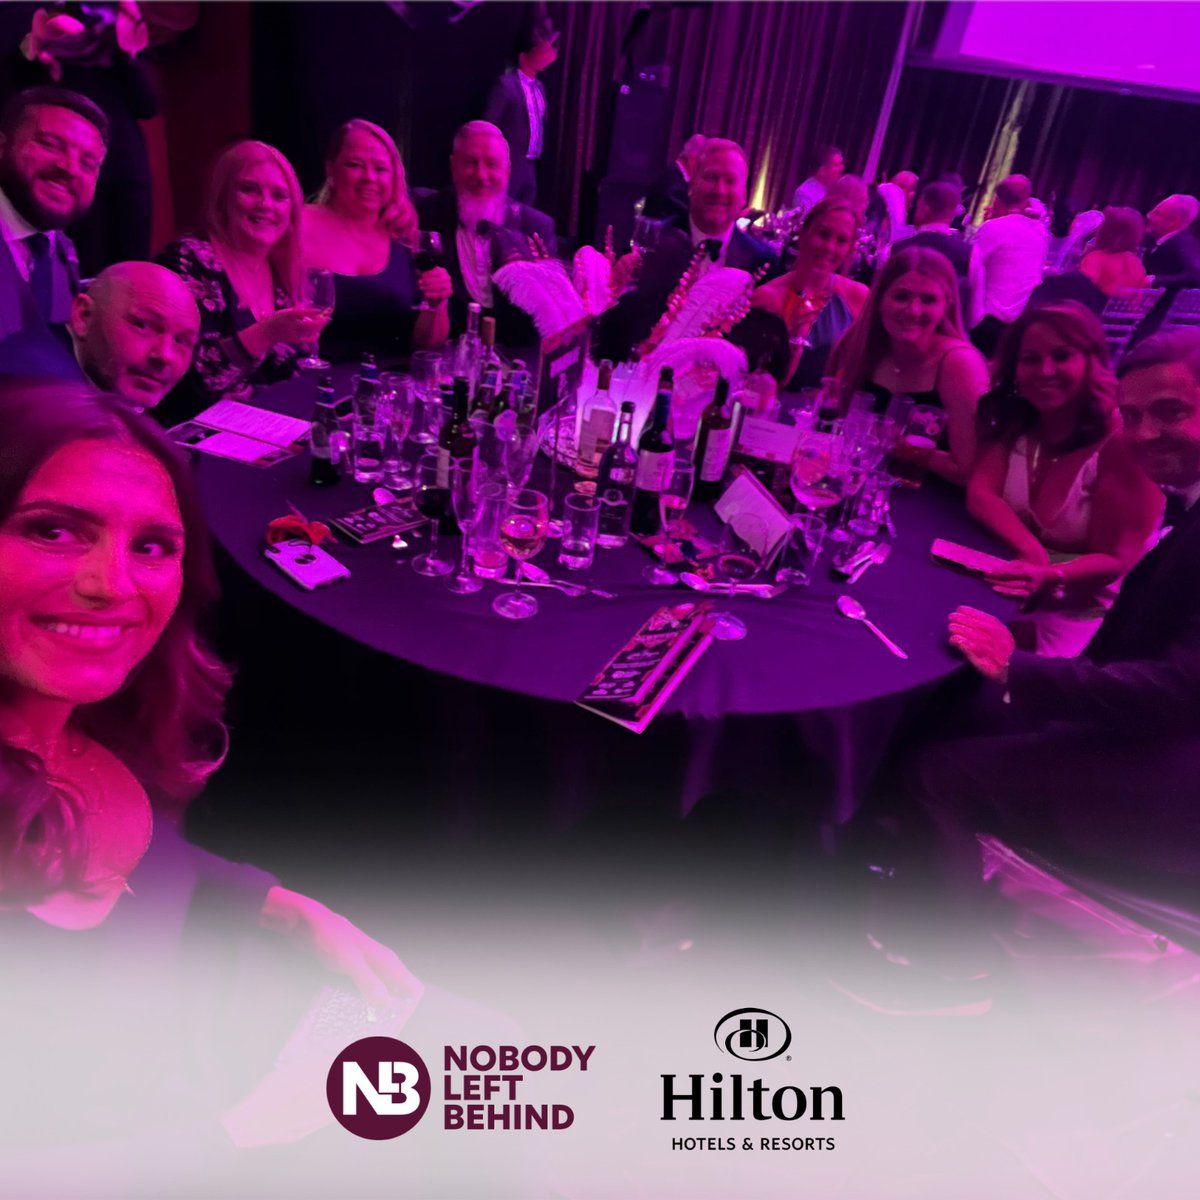 Thank you to Kelly and Tom from @hiltonliverpool for inviting NLB to @JohnHaynesFoun2 Gala Dinner. We had a great evening! For more information on our projects, contact paul@nlb-cic.co.uk #galadinner #liverpoolemployment #liverpoolcareers #liverpooljobs